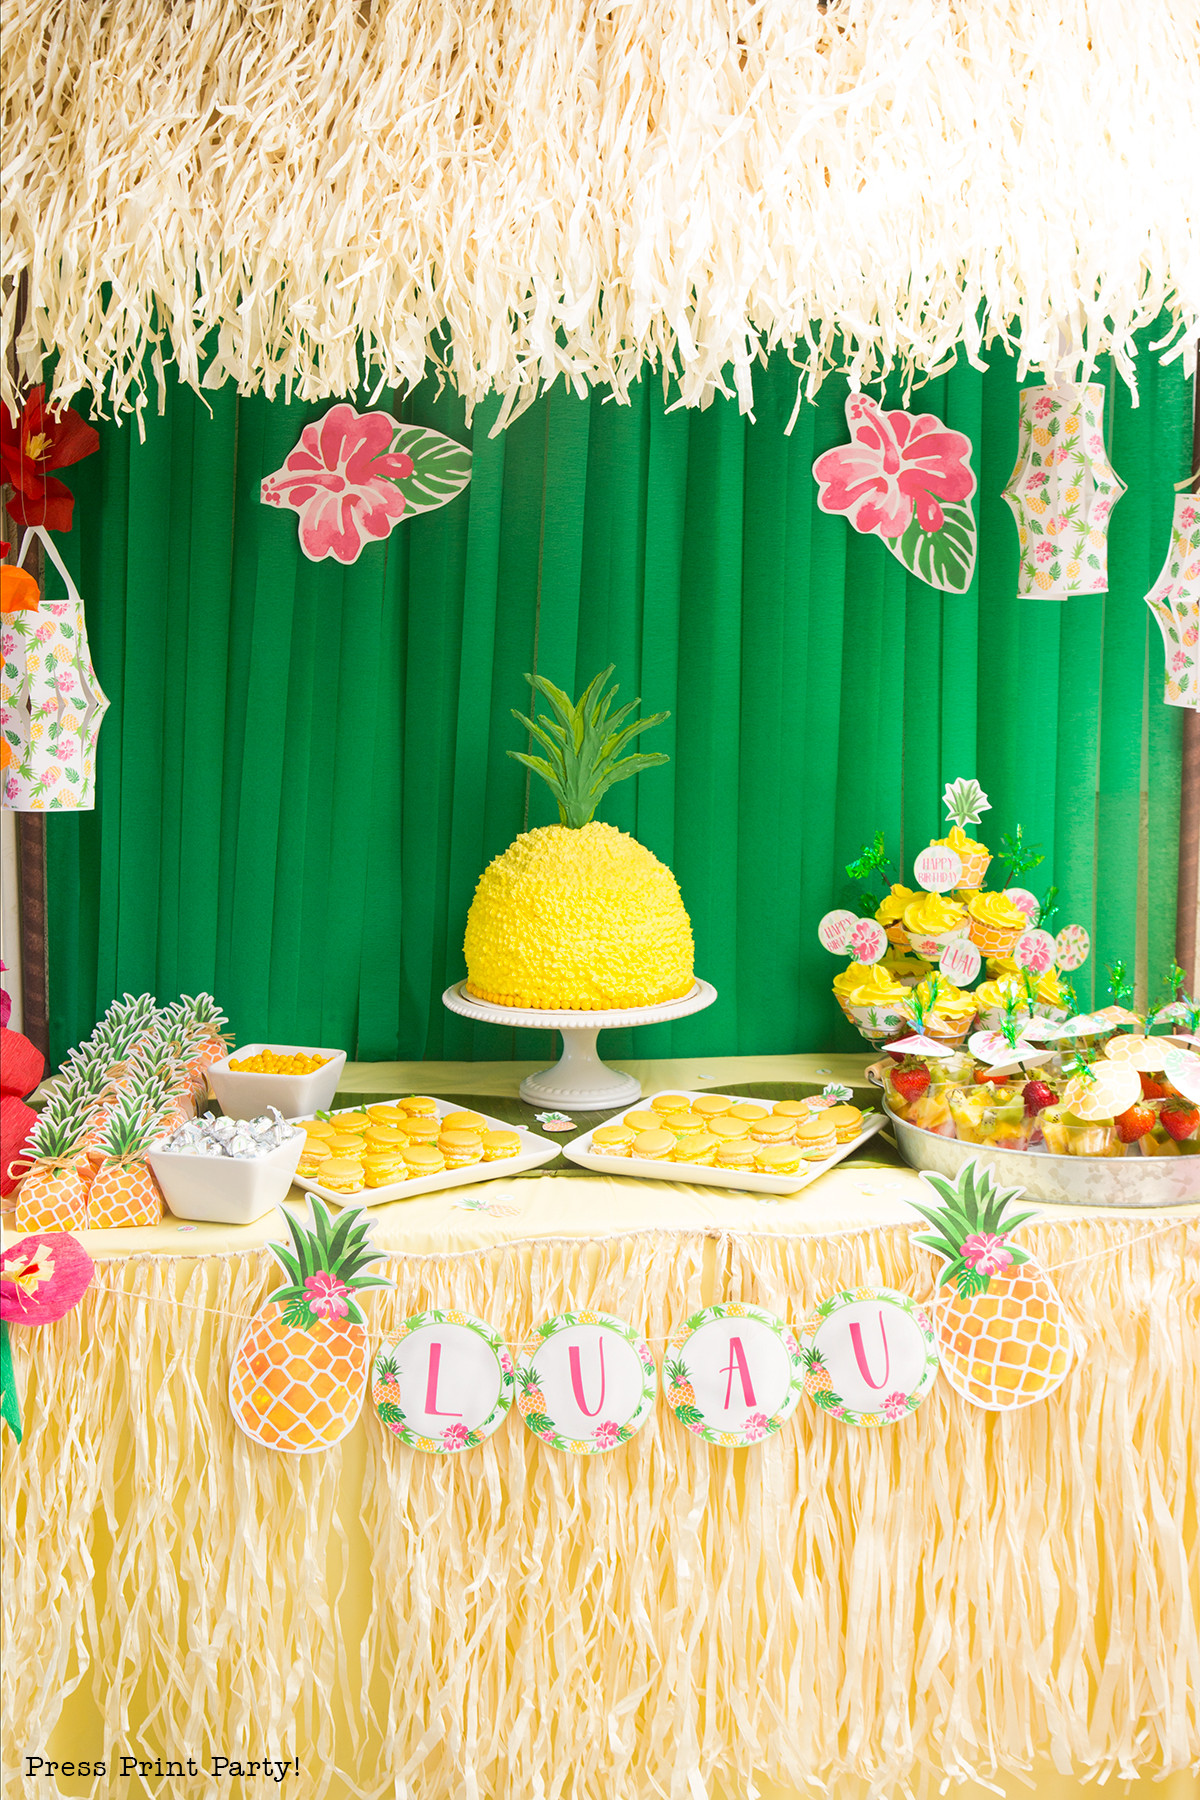 Decorations For Birthday Party
 Sweet "Party Like a Pineapple " Birthday Party Luau